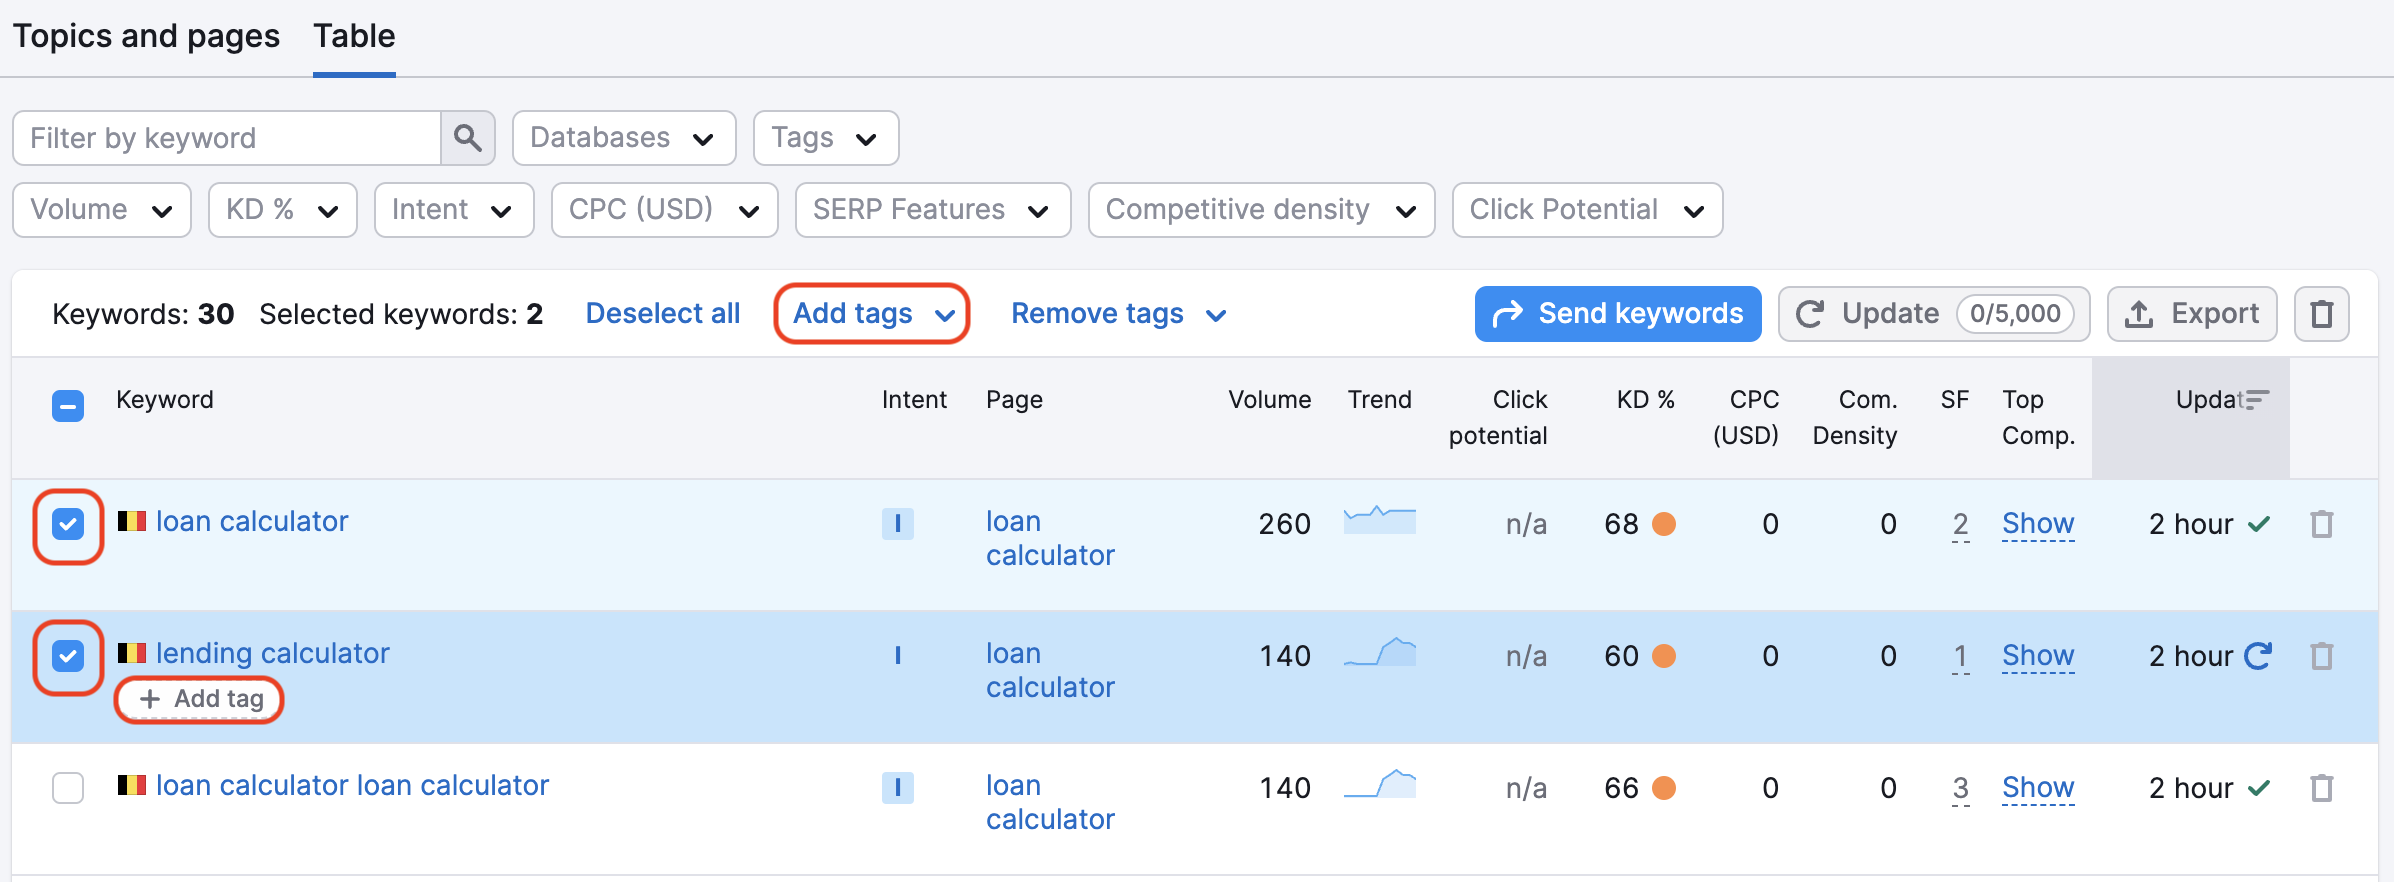 An example of the Table tab in Keyword Strategy Builder with red rectangles highlighting the selected keyword, the Add tag button that appears under a keyword when you hover over it, and the Add tags button at the top of the table. 